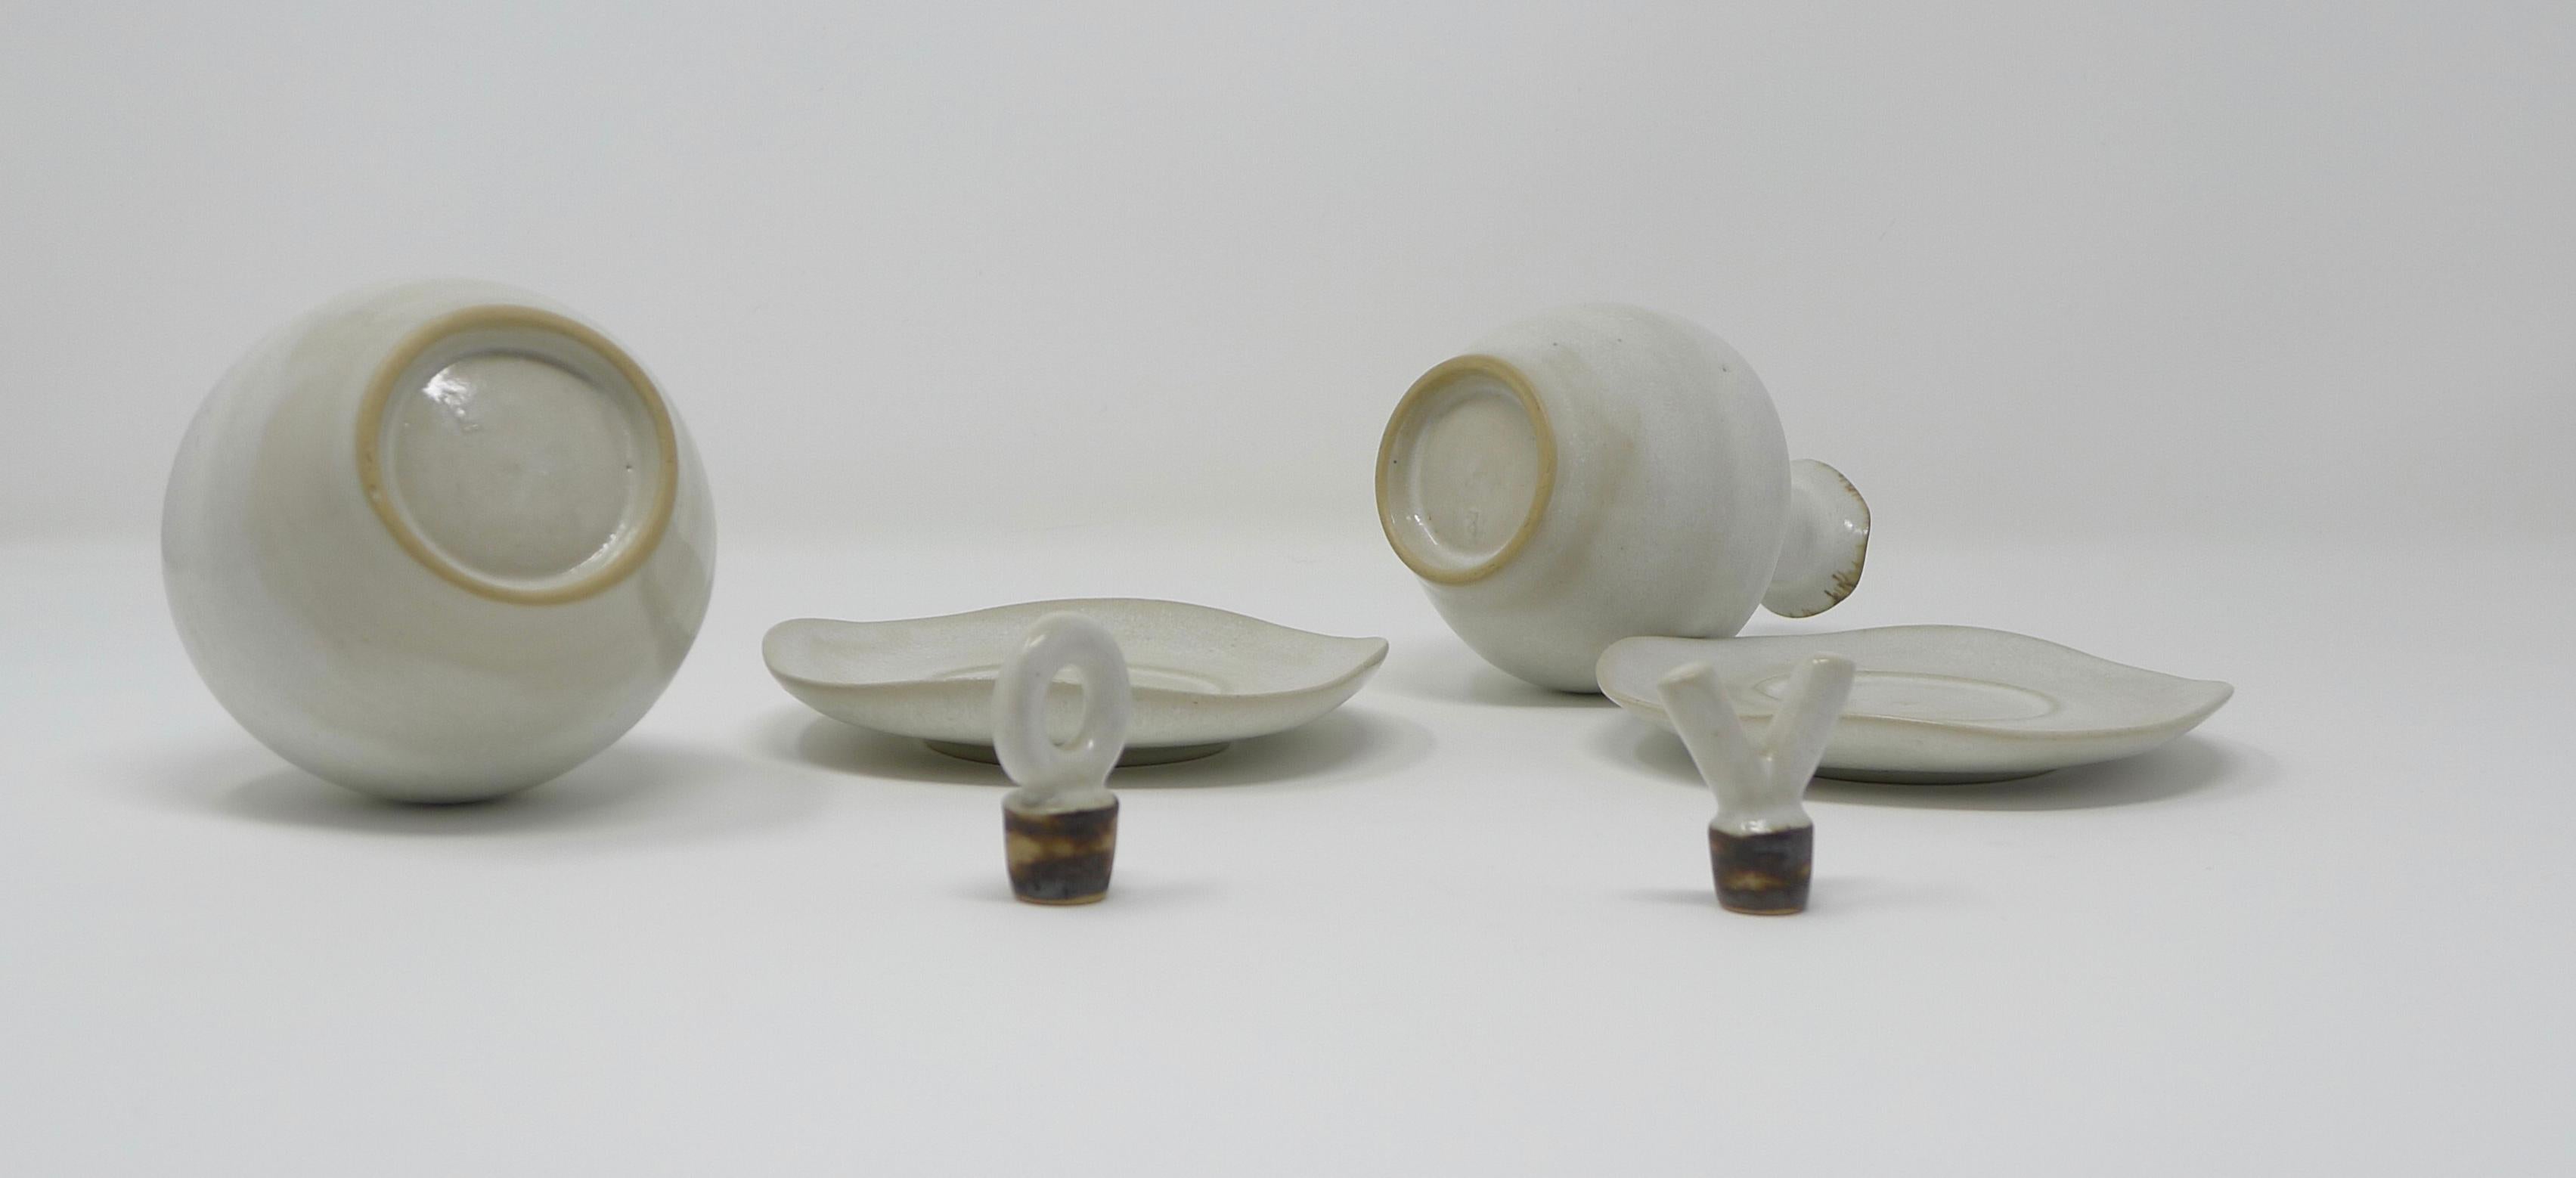 Mid-20th Century Lucie Rie, Oil and Vinegar Set in White Glaze, Fully Signed, Early 1950s